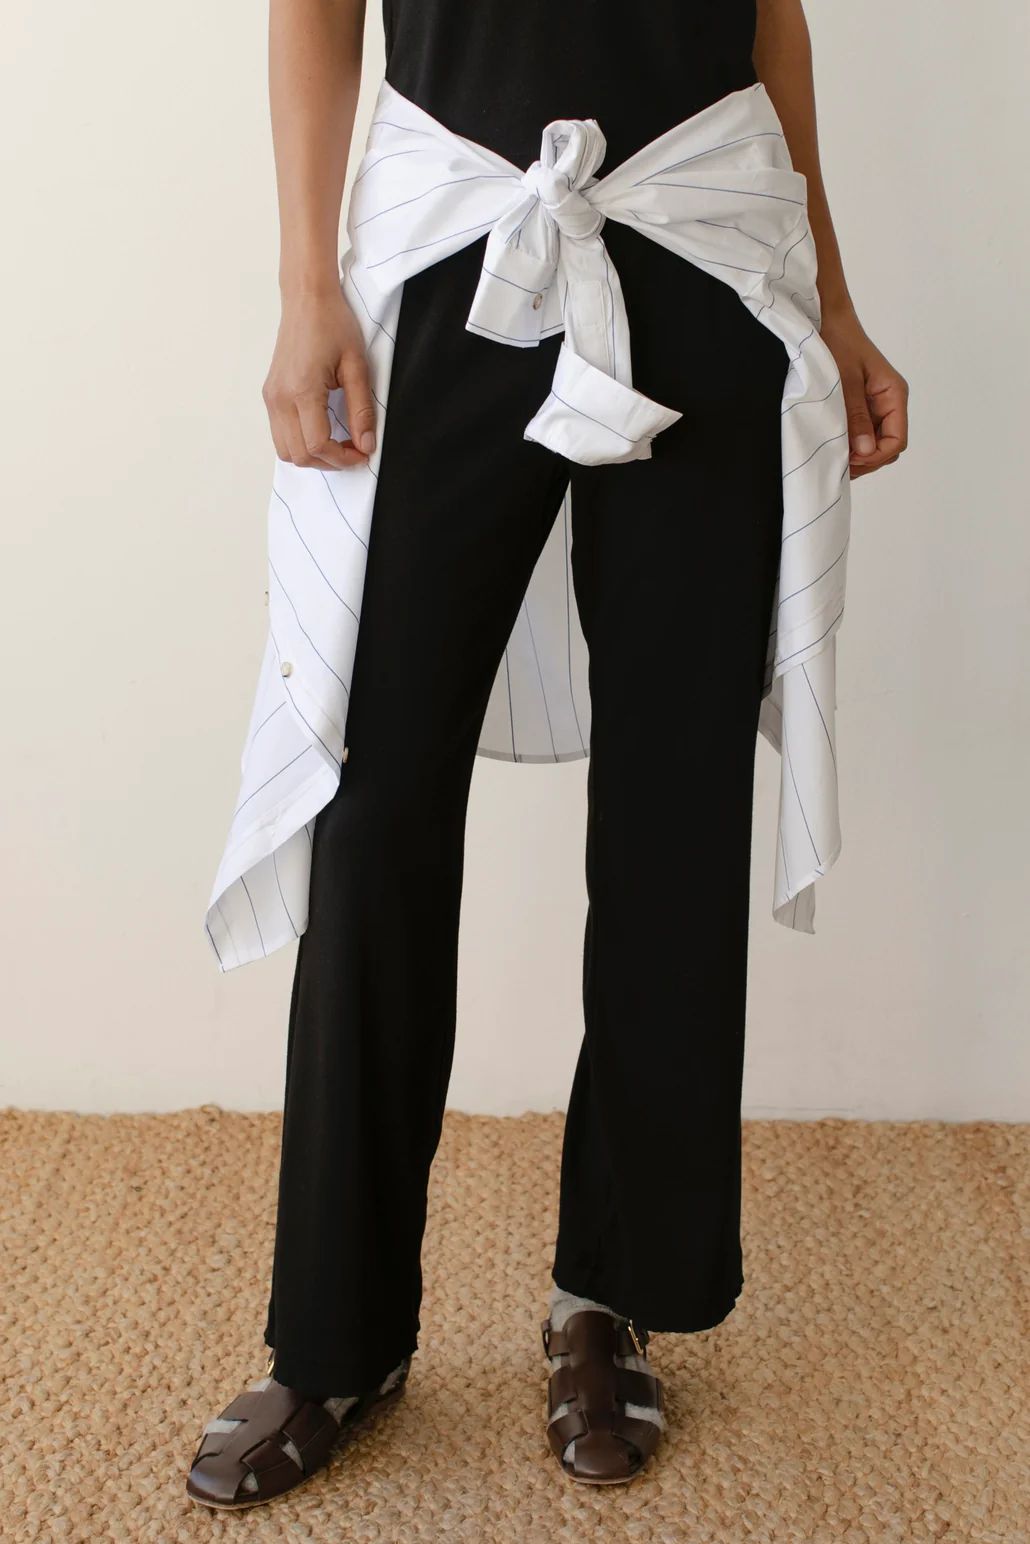 The Baby Rib Scallop Pant | DONNI.